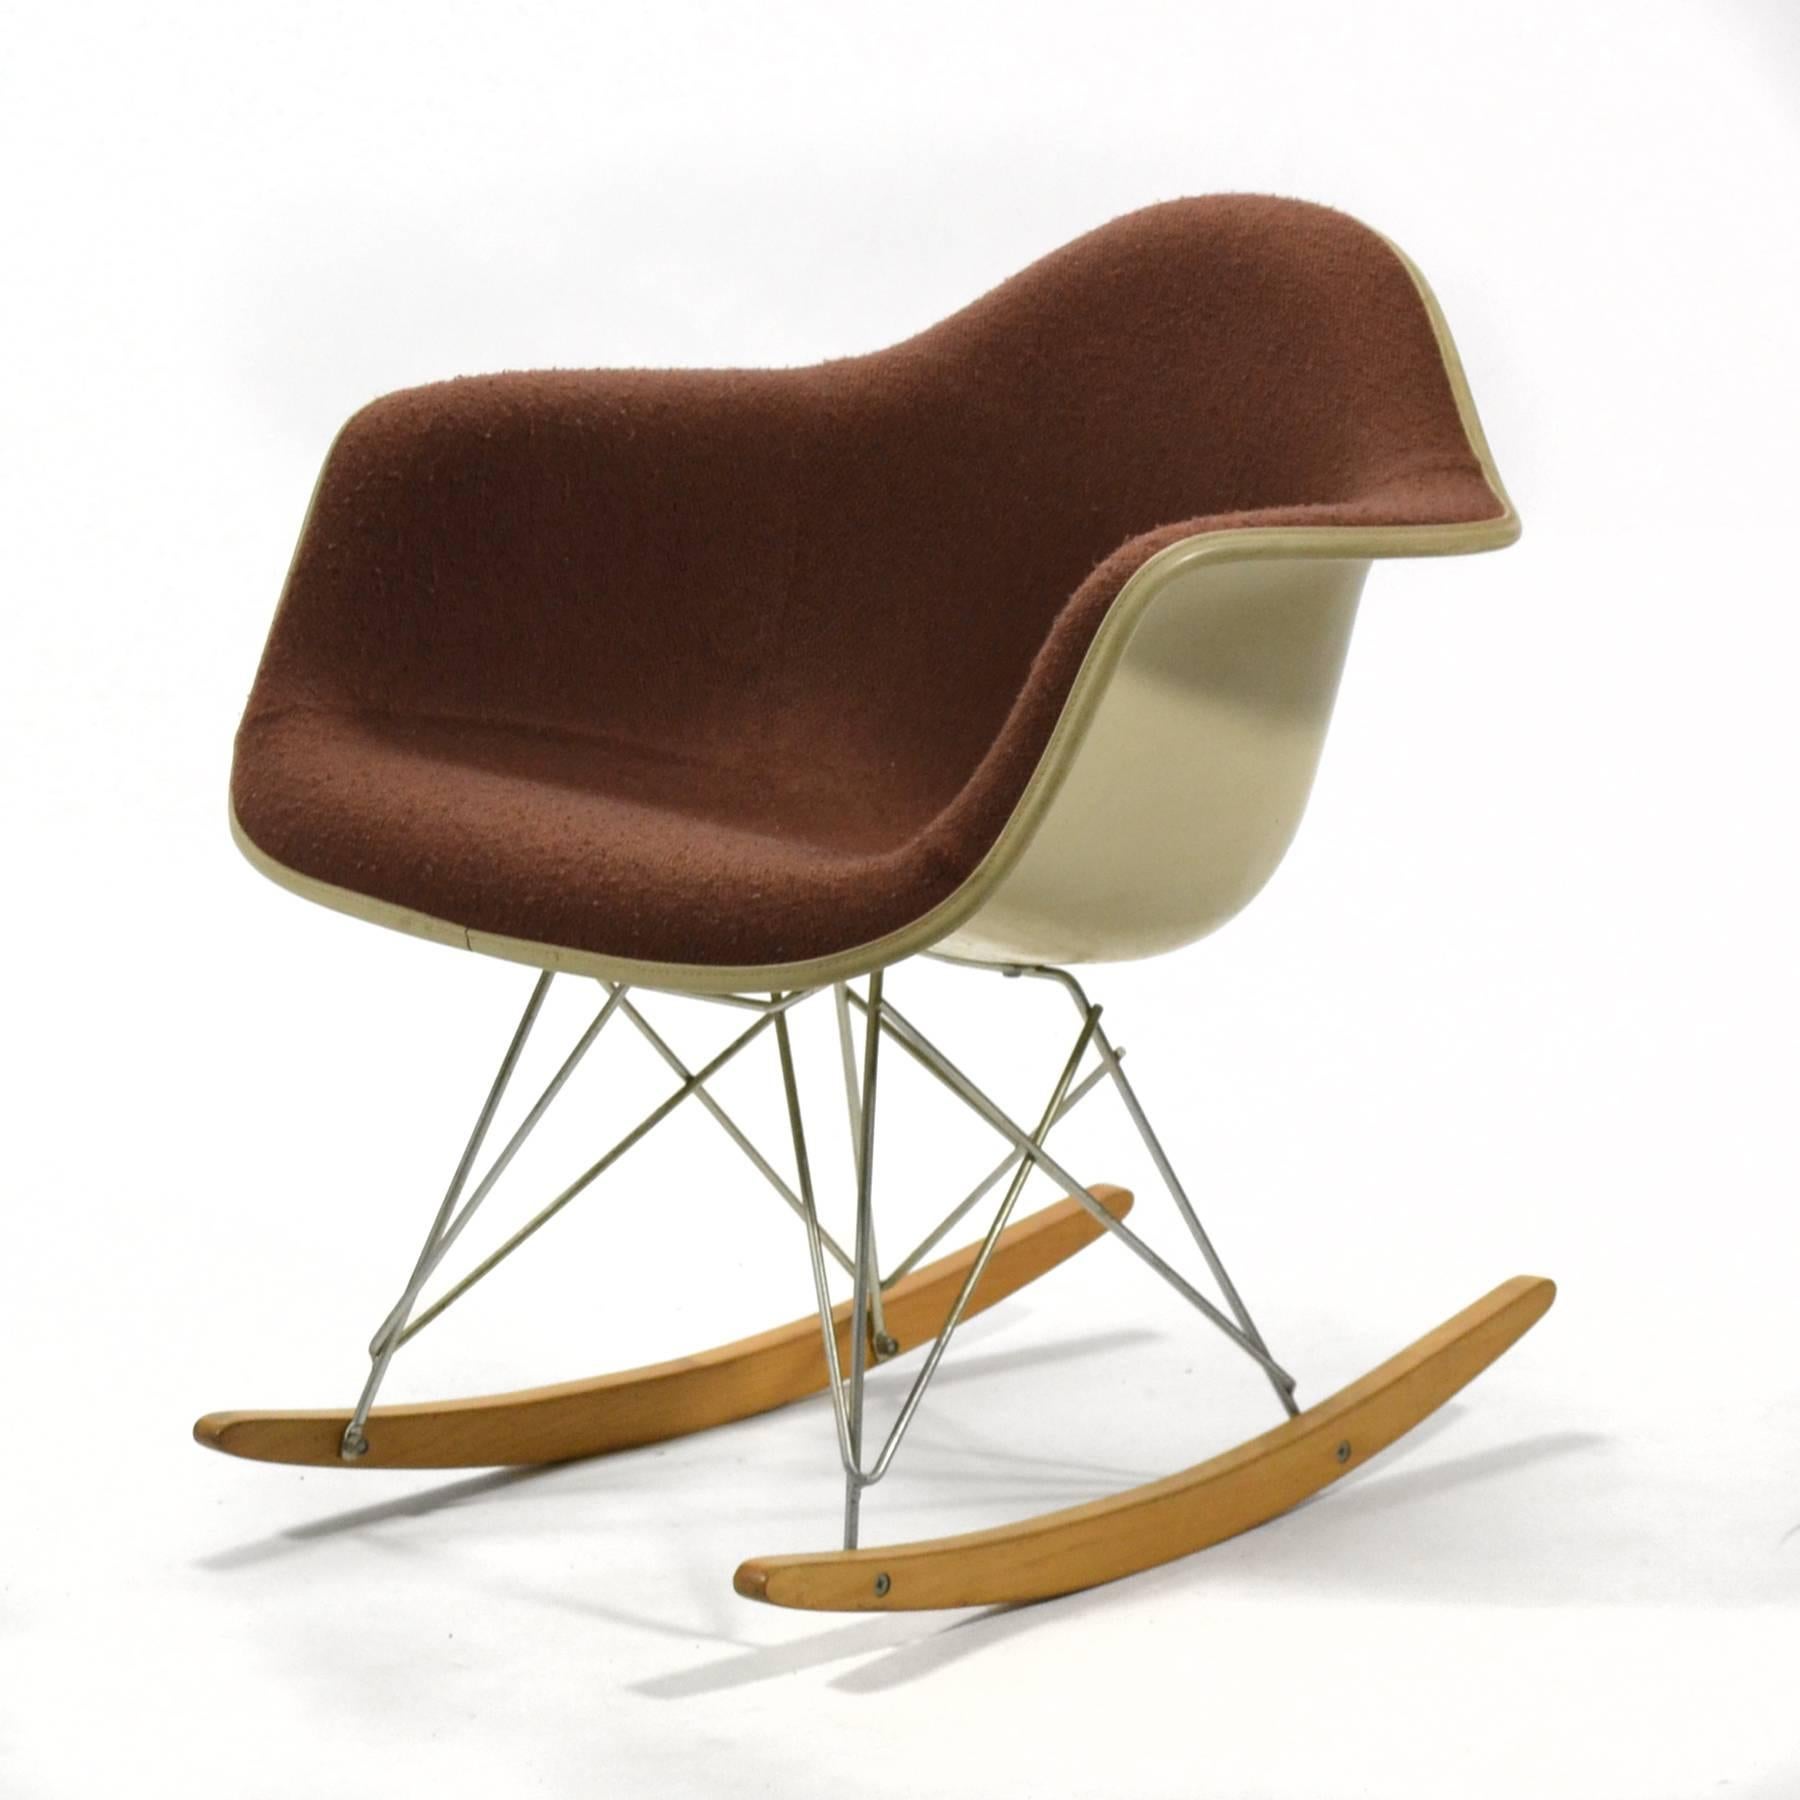 If an employee of Herman Miller were to have a child, they were given an Eames RAR rocking chair to commemorate the birth. It would be marked with a small placard commemorating the name and birthdate of the child. The beautiful example is one of